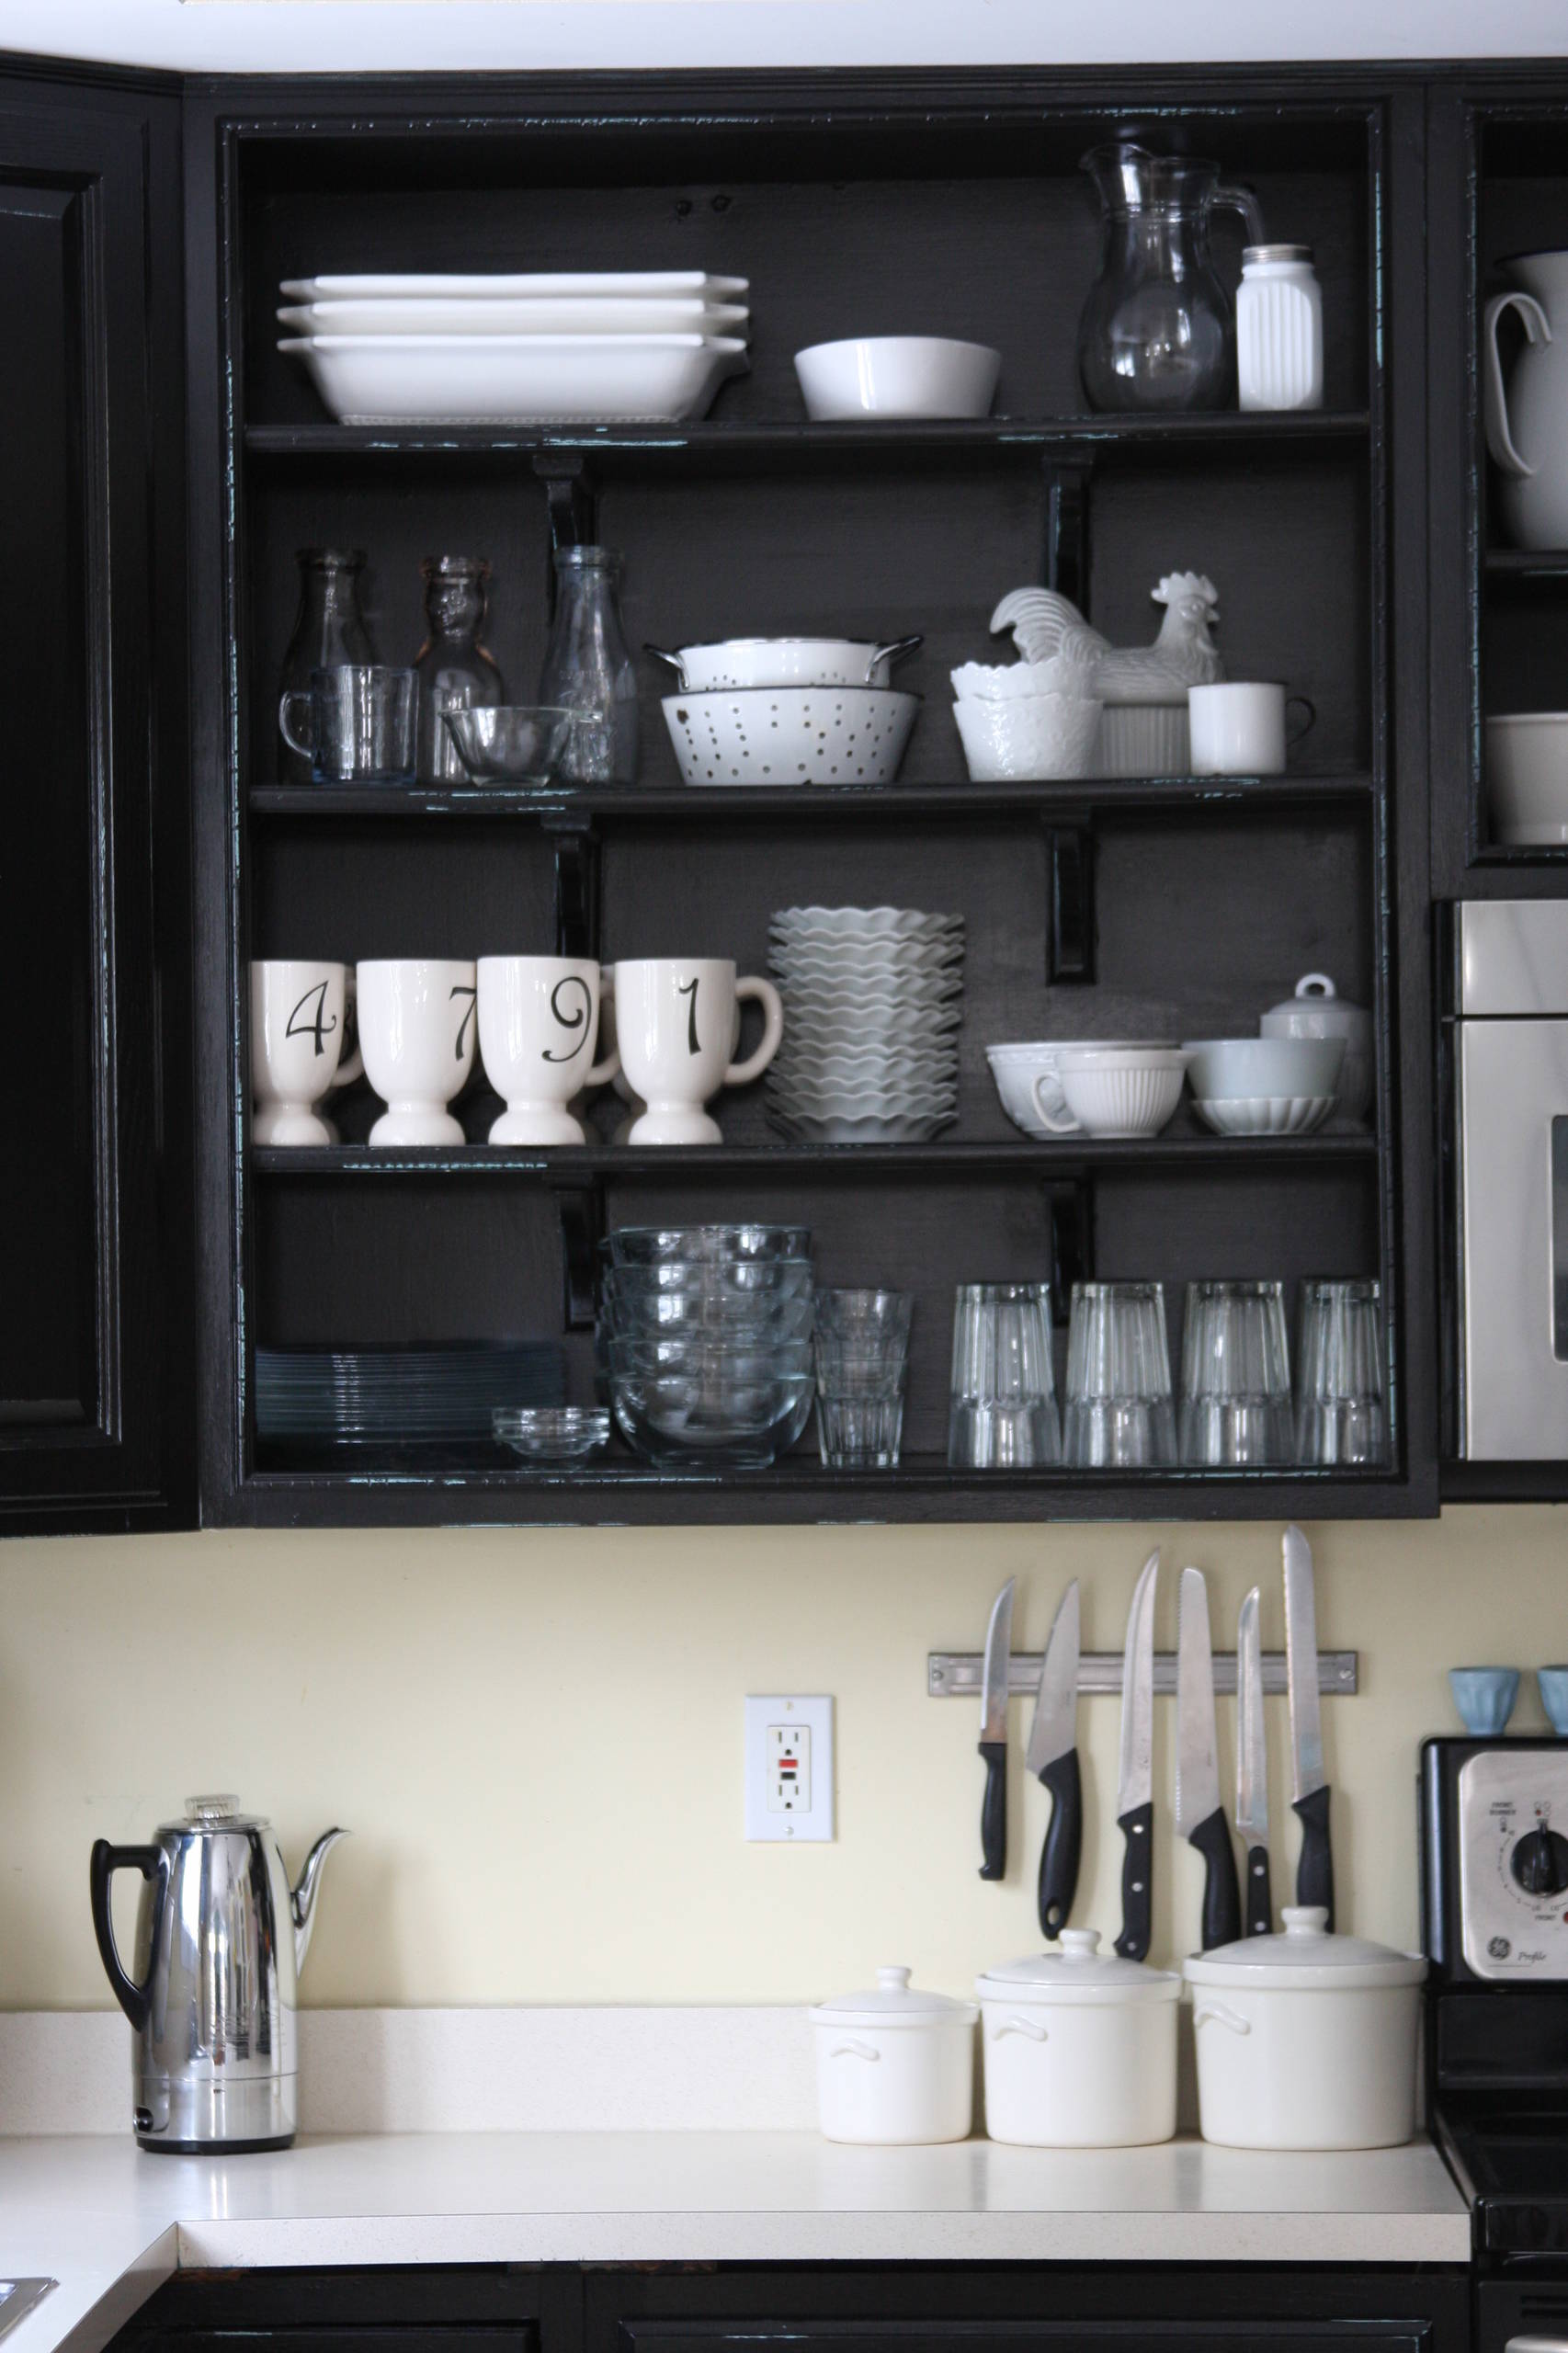 DIY open shelving: Converting kitchen cabinets to shelves